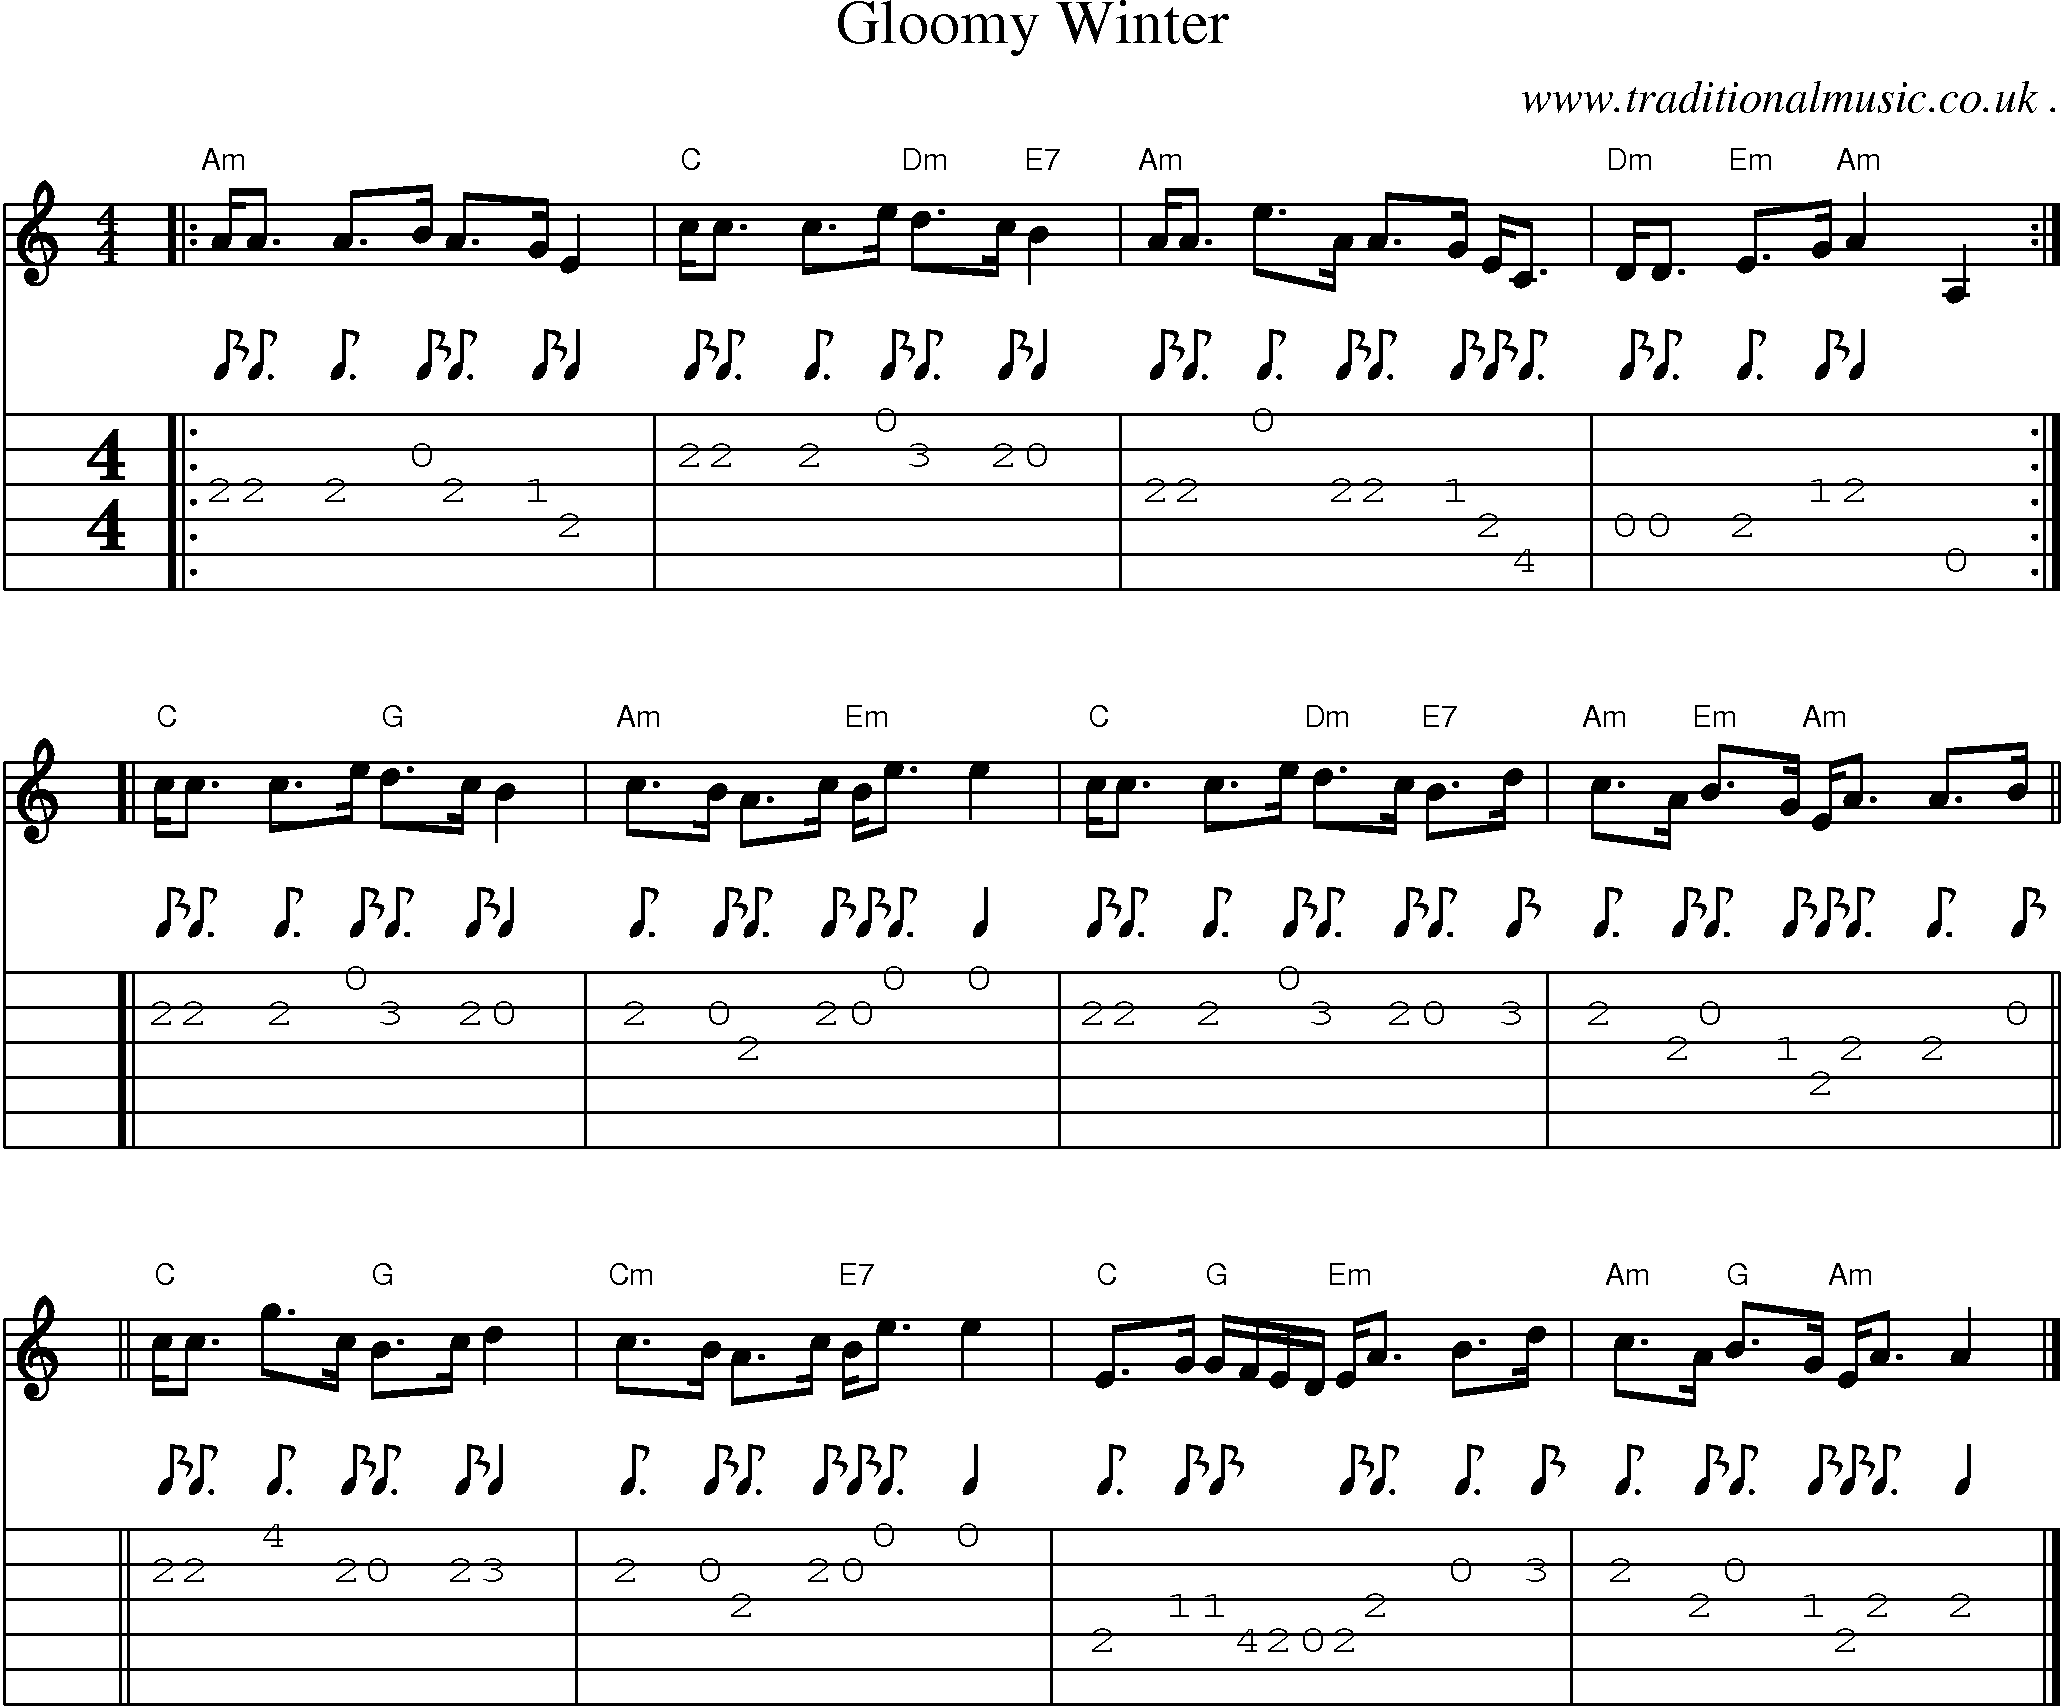 Sheet-music  score, Chords and Guitar Tabs for Gloomy Winter